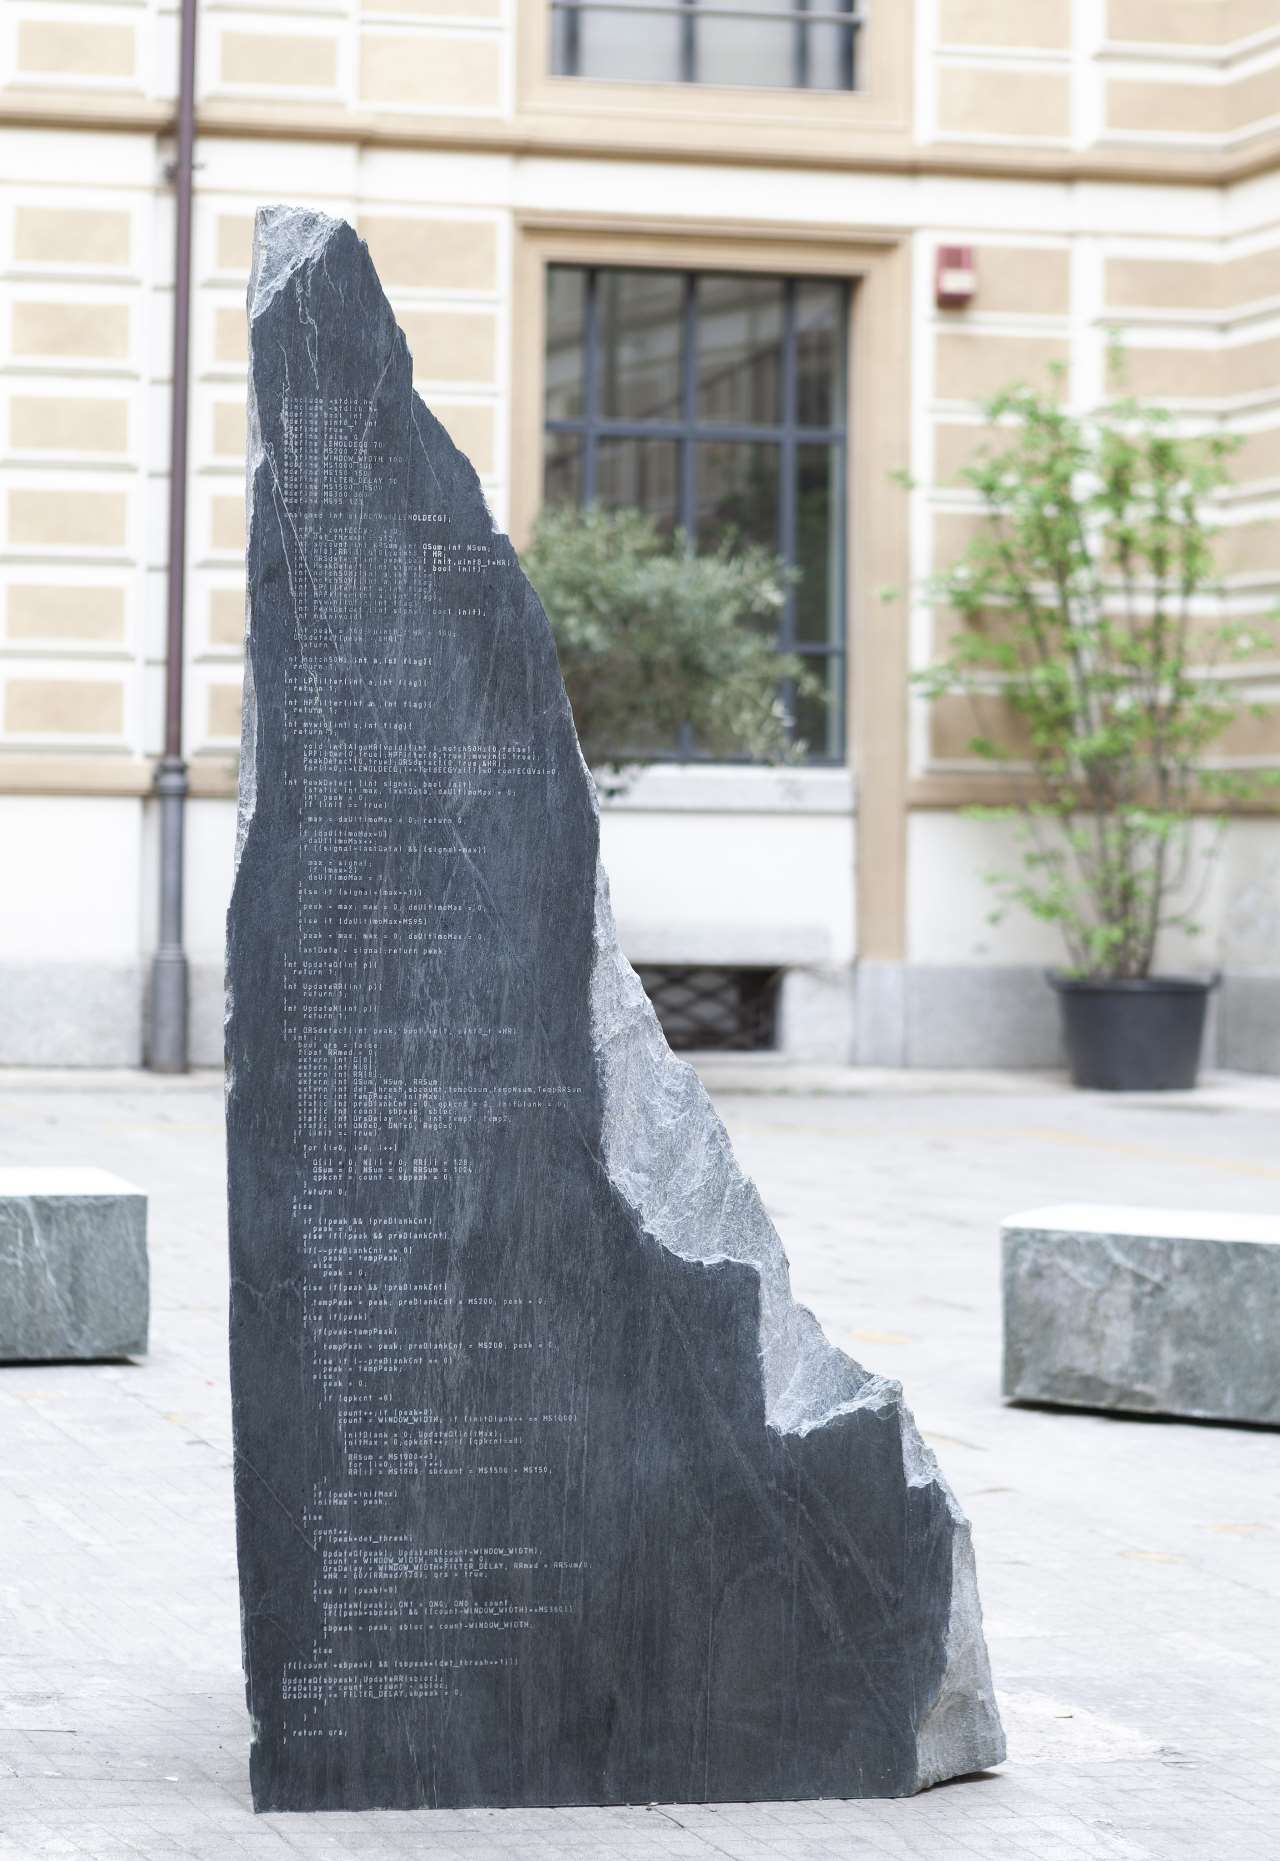 Human Code by Roberto Sironi exhibition view, featuring Menhir (2019). Photo by Federico Villa.